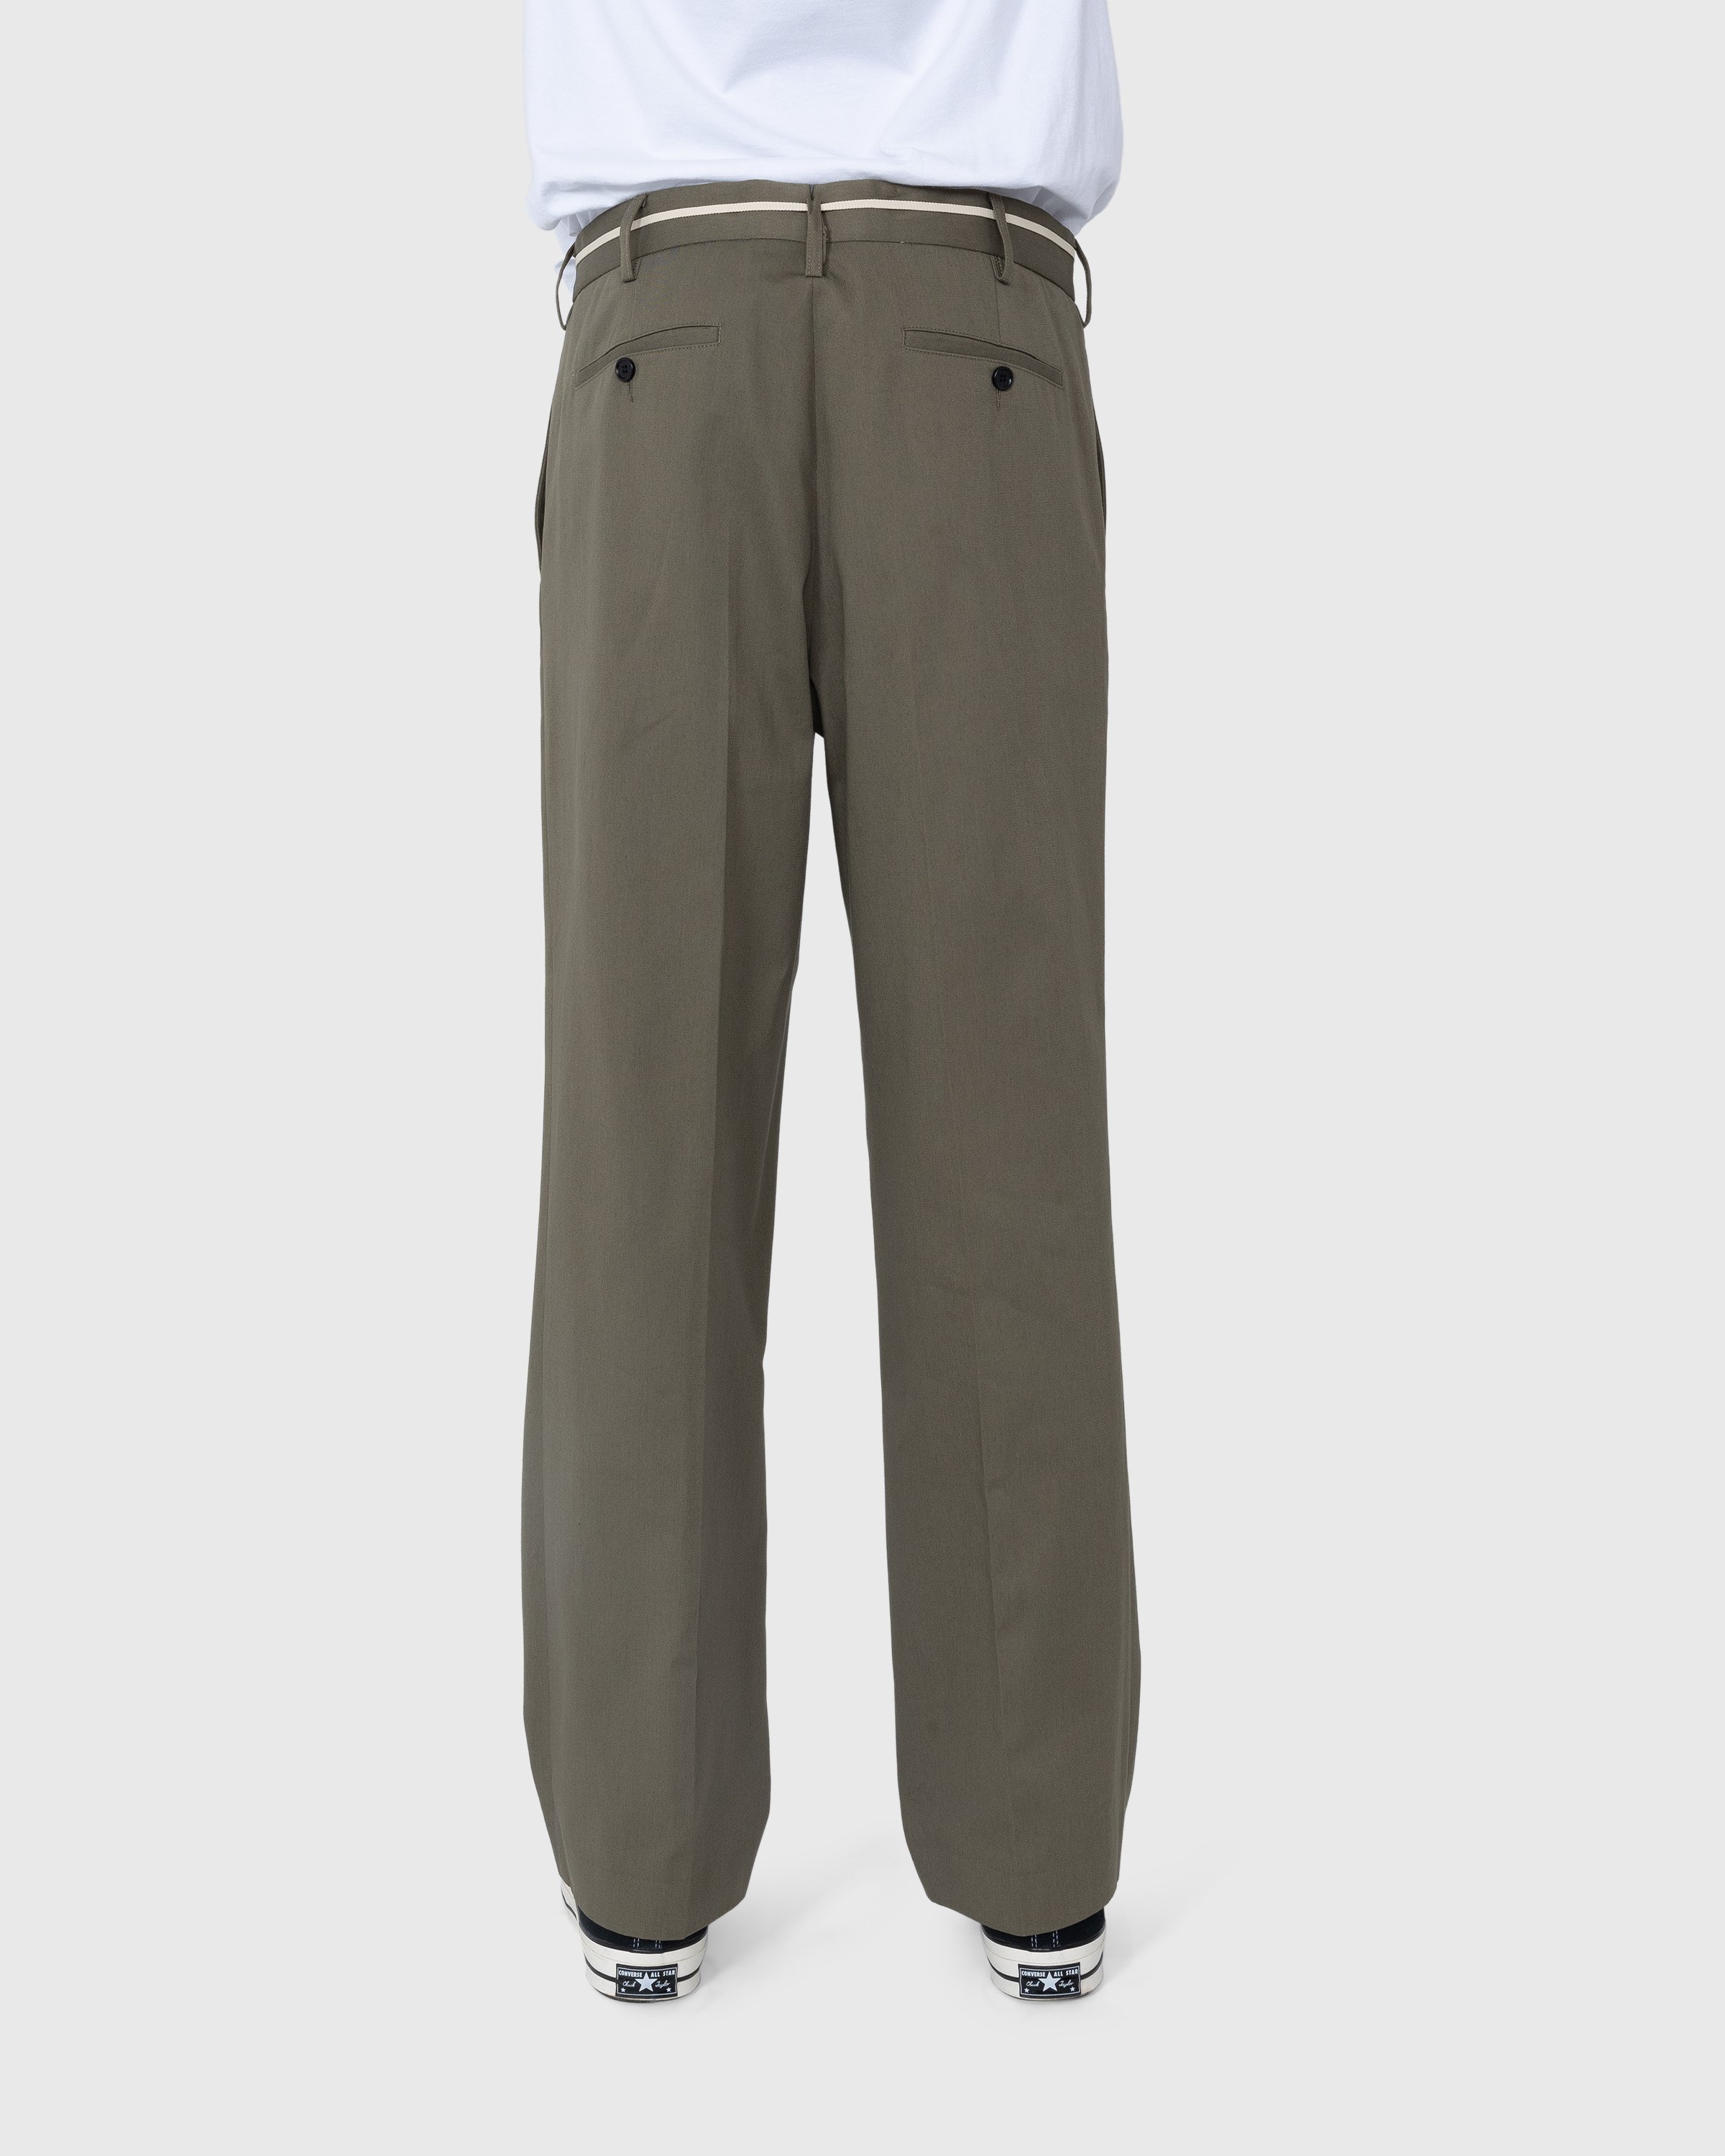 Marni - Gabardine Cotton Cropped Trousers Stone Green - Clothing - Green - Image 4